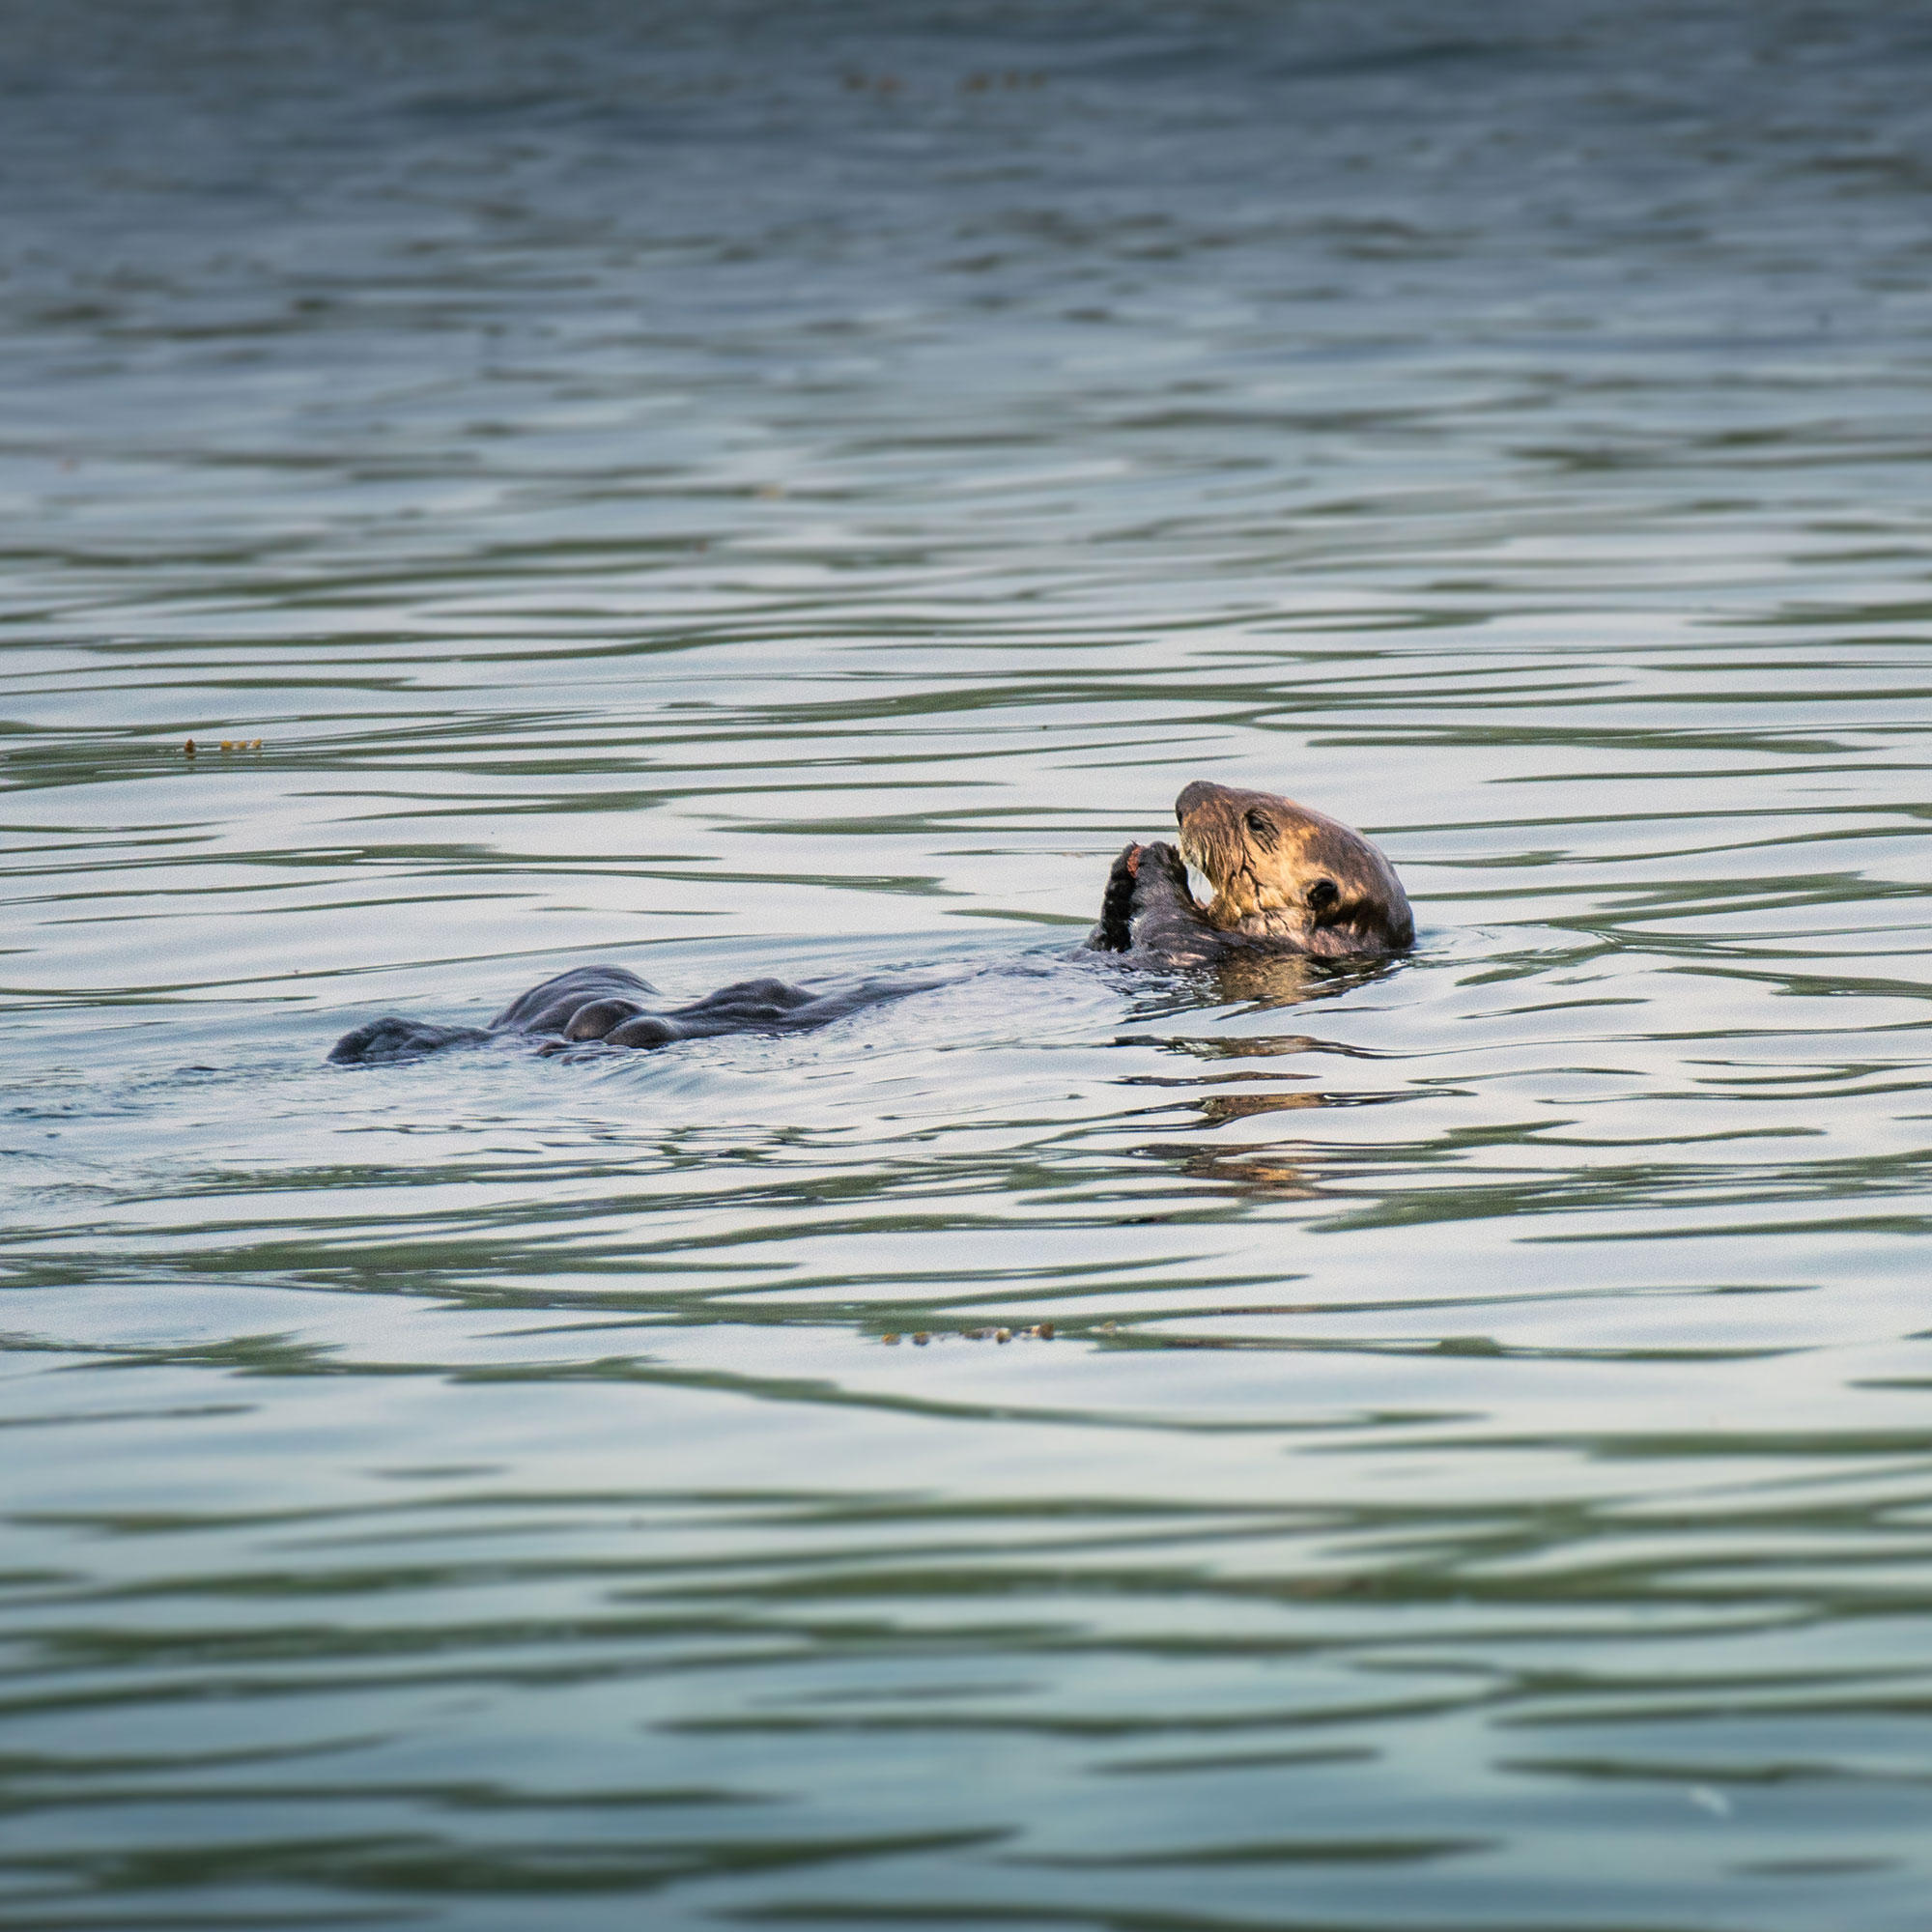 Sea Otter Swimming Backward with Head out of Water Eating Food